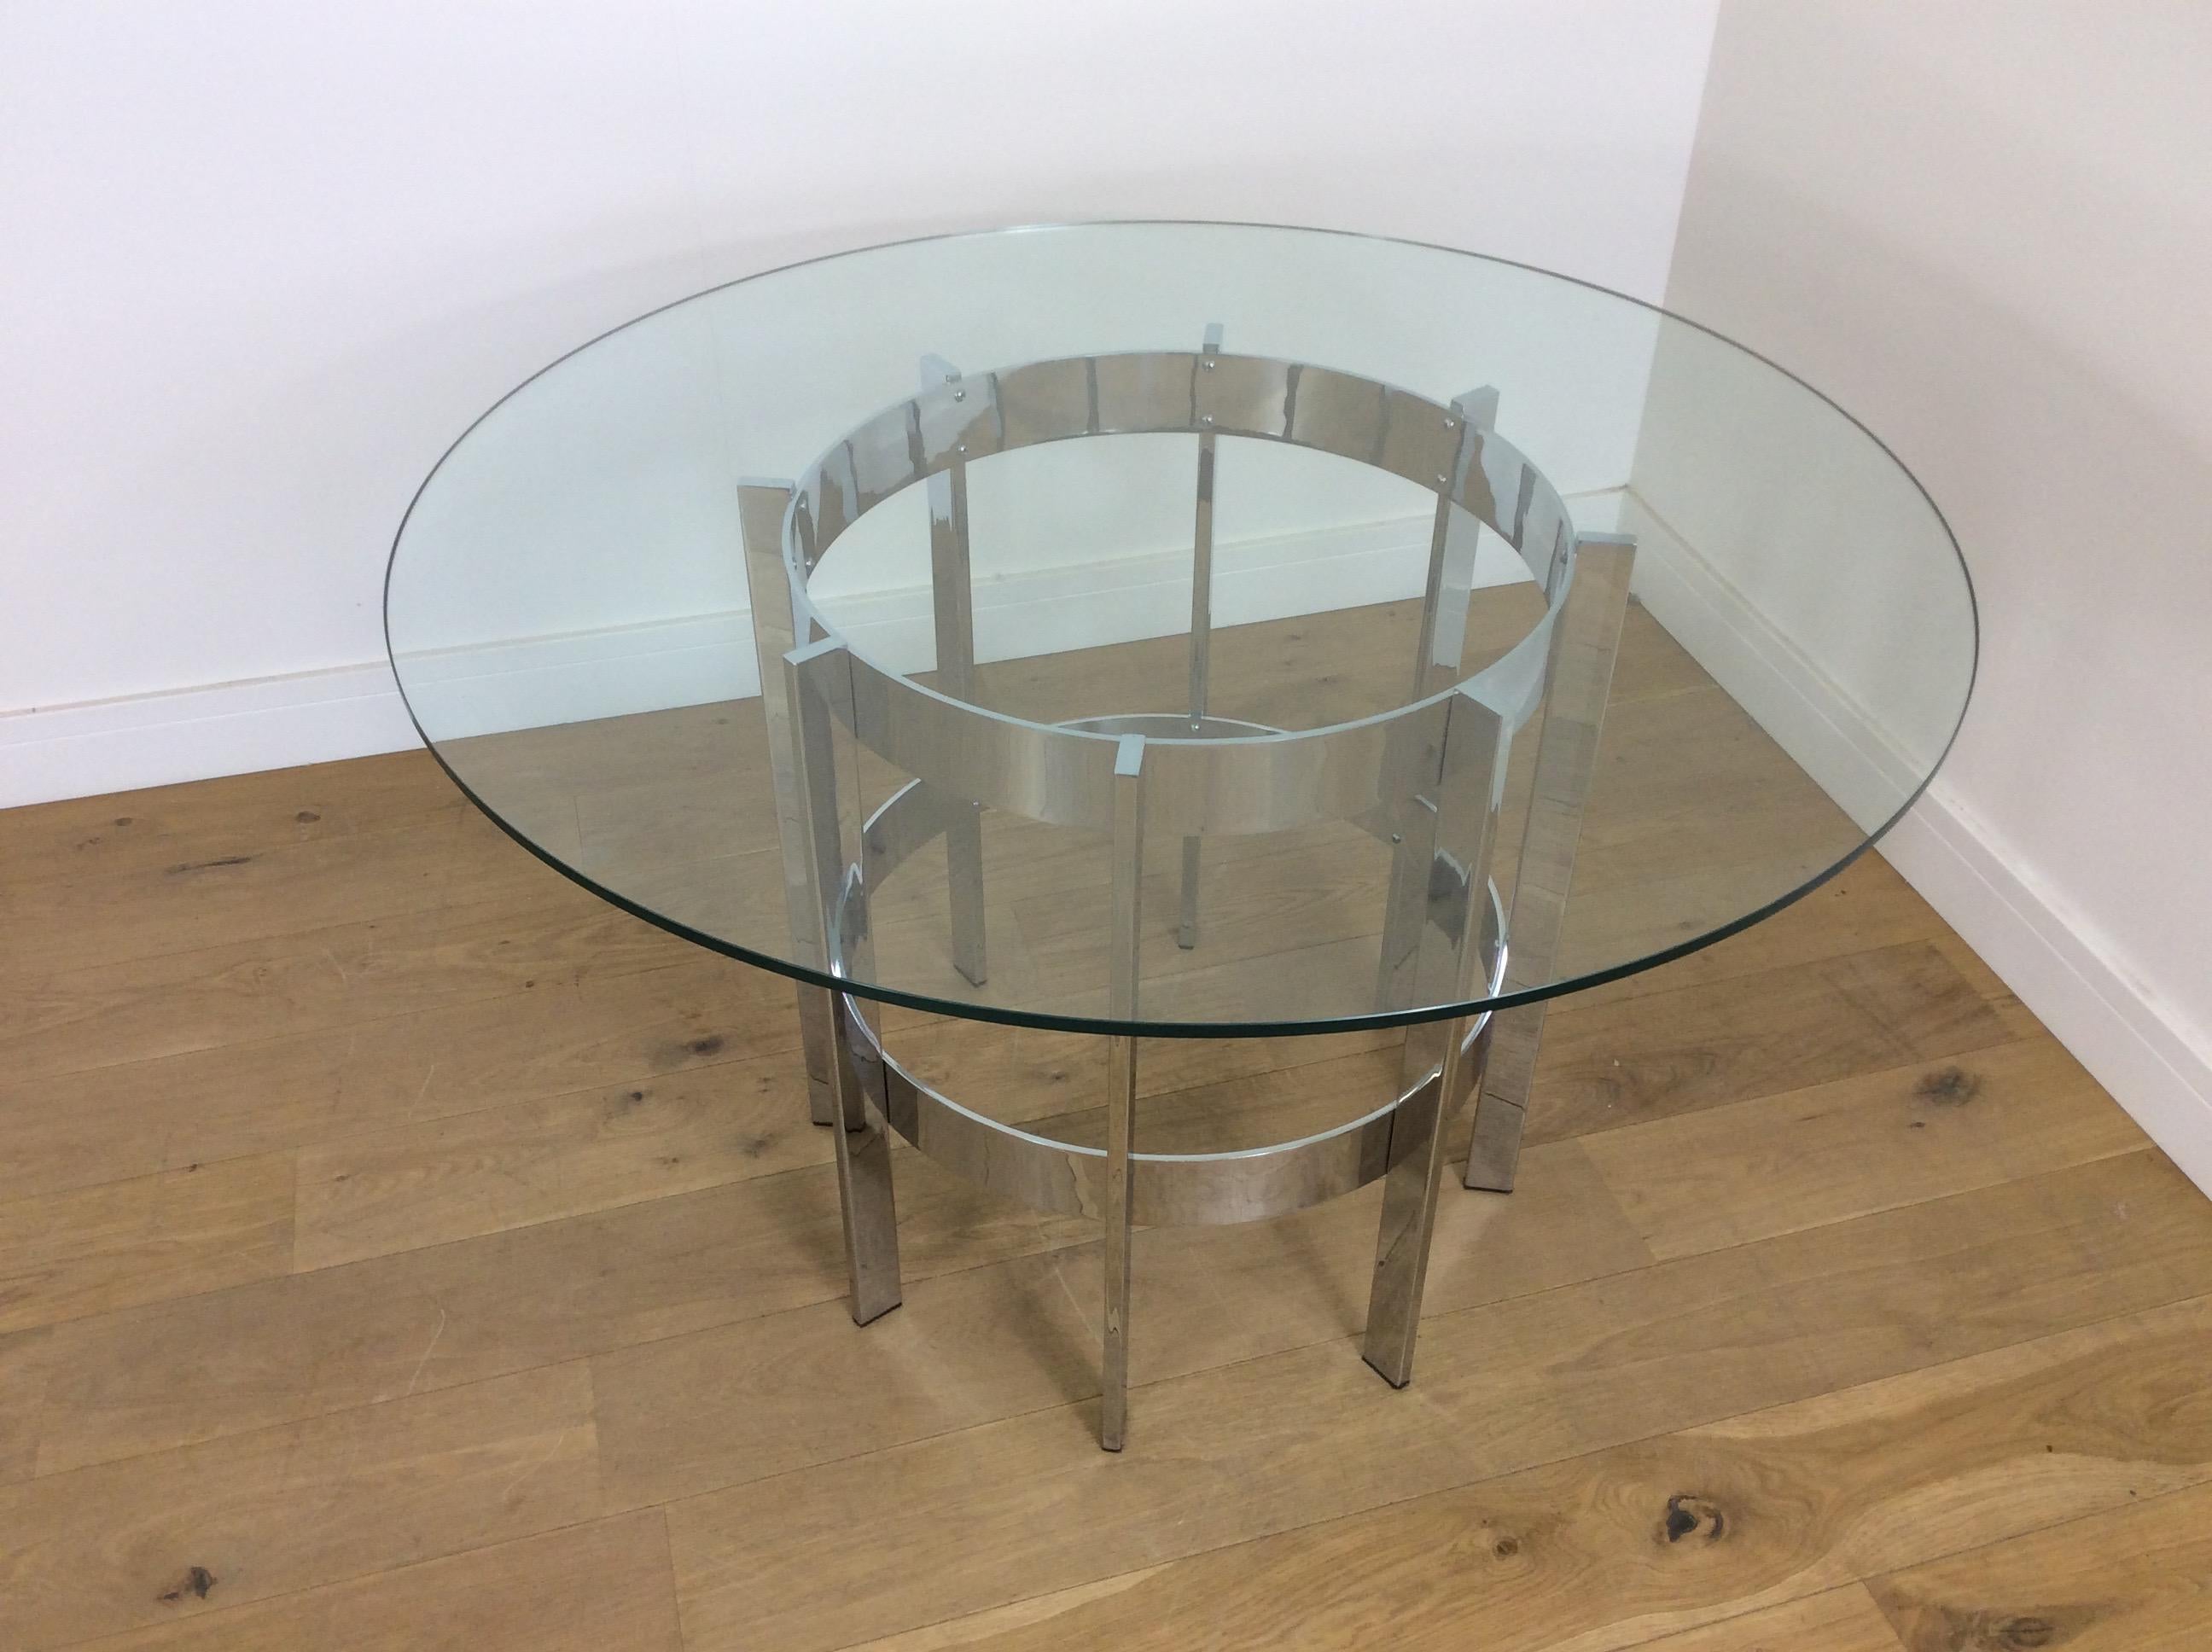 Midcentury chrome and glass top table from Merrow Associates.
Very high quality flat chrome framed table with plate glass top, designed by Richard Young for morrow Associates.
British, circa 1970
Measures: 71.5 cm H, 114.5 cm dia.